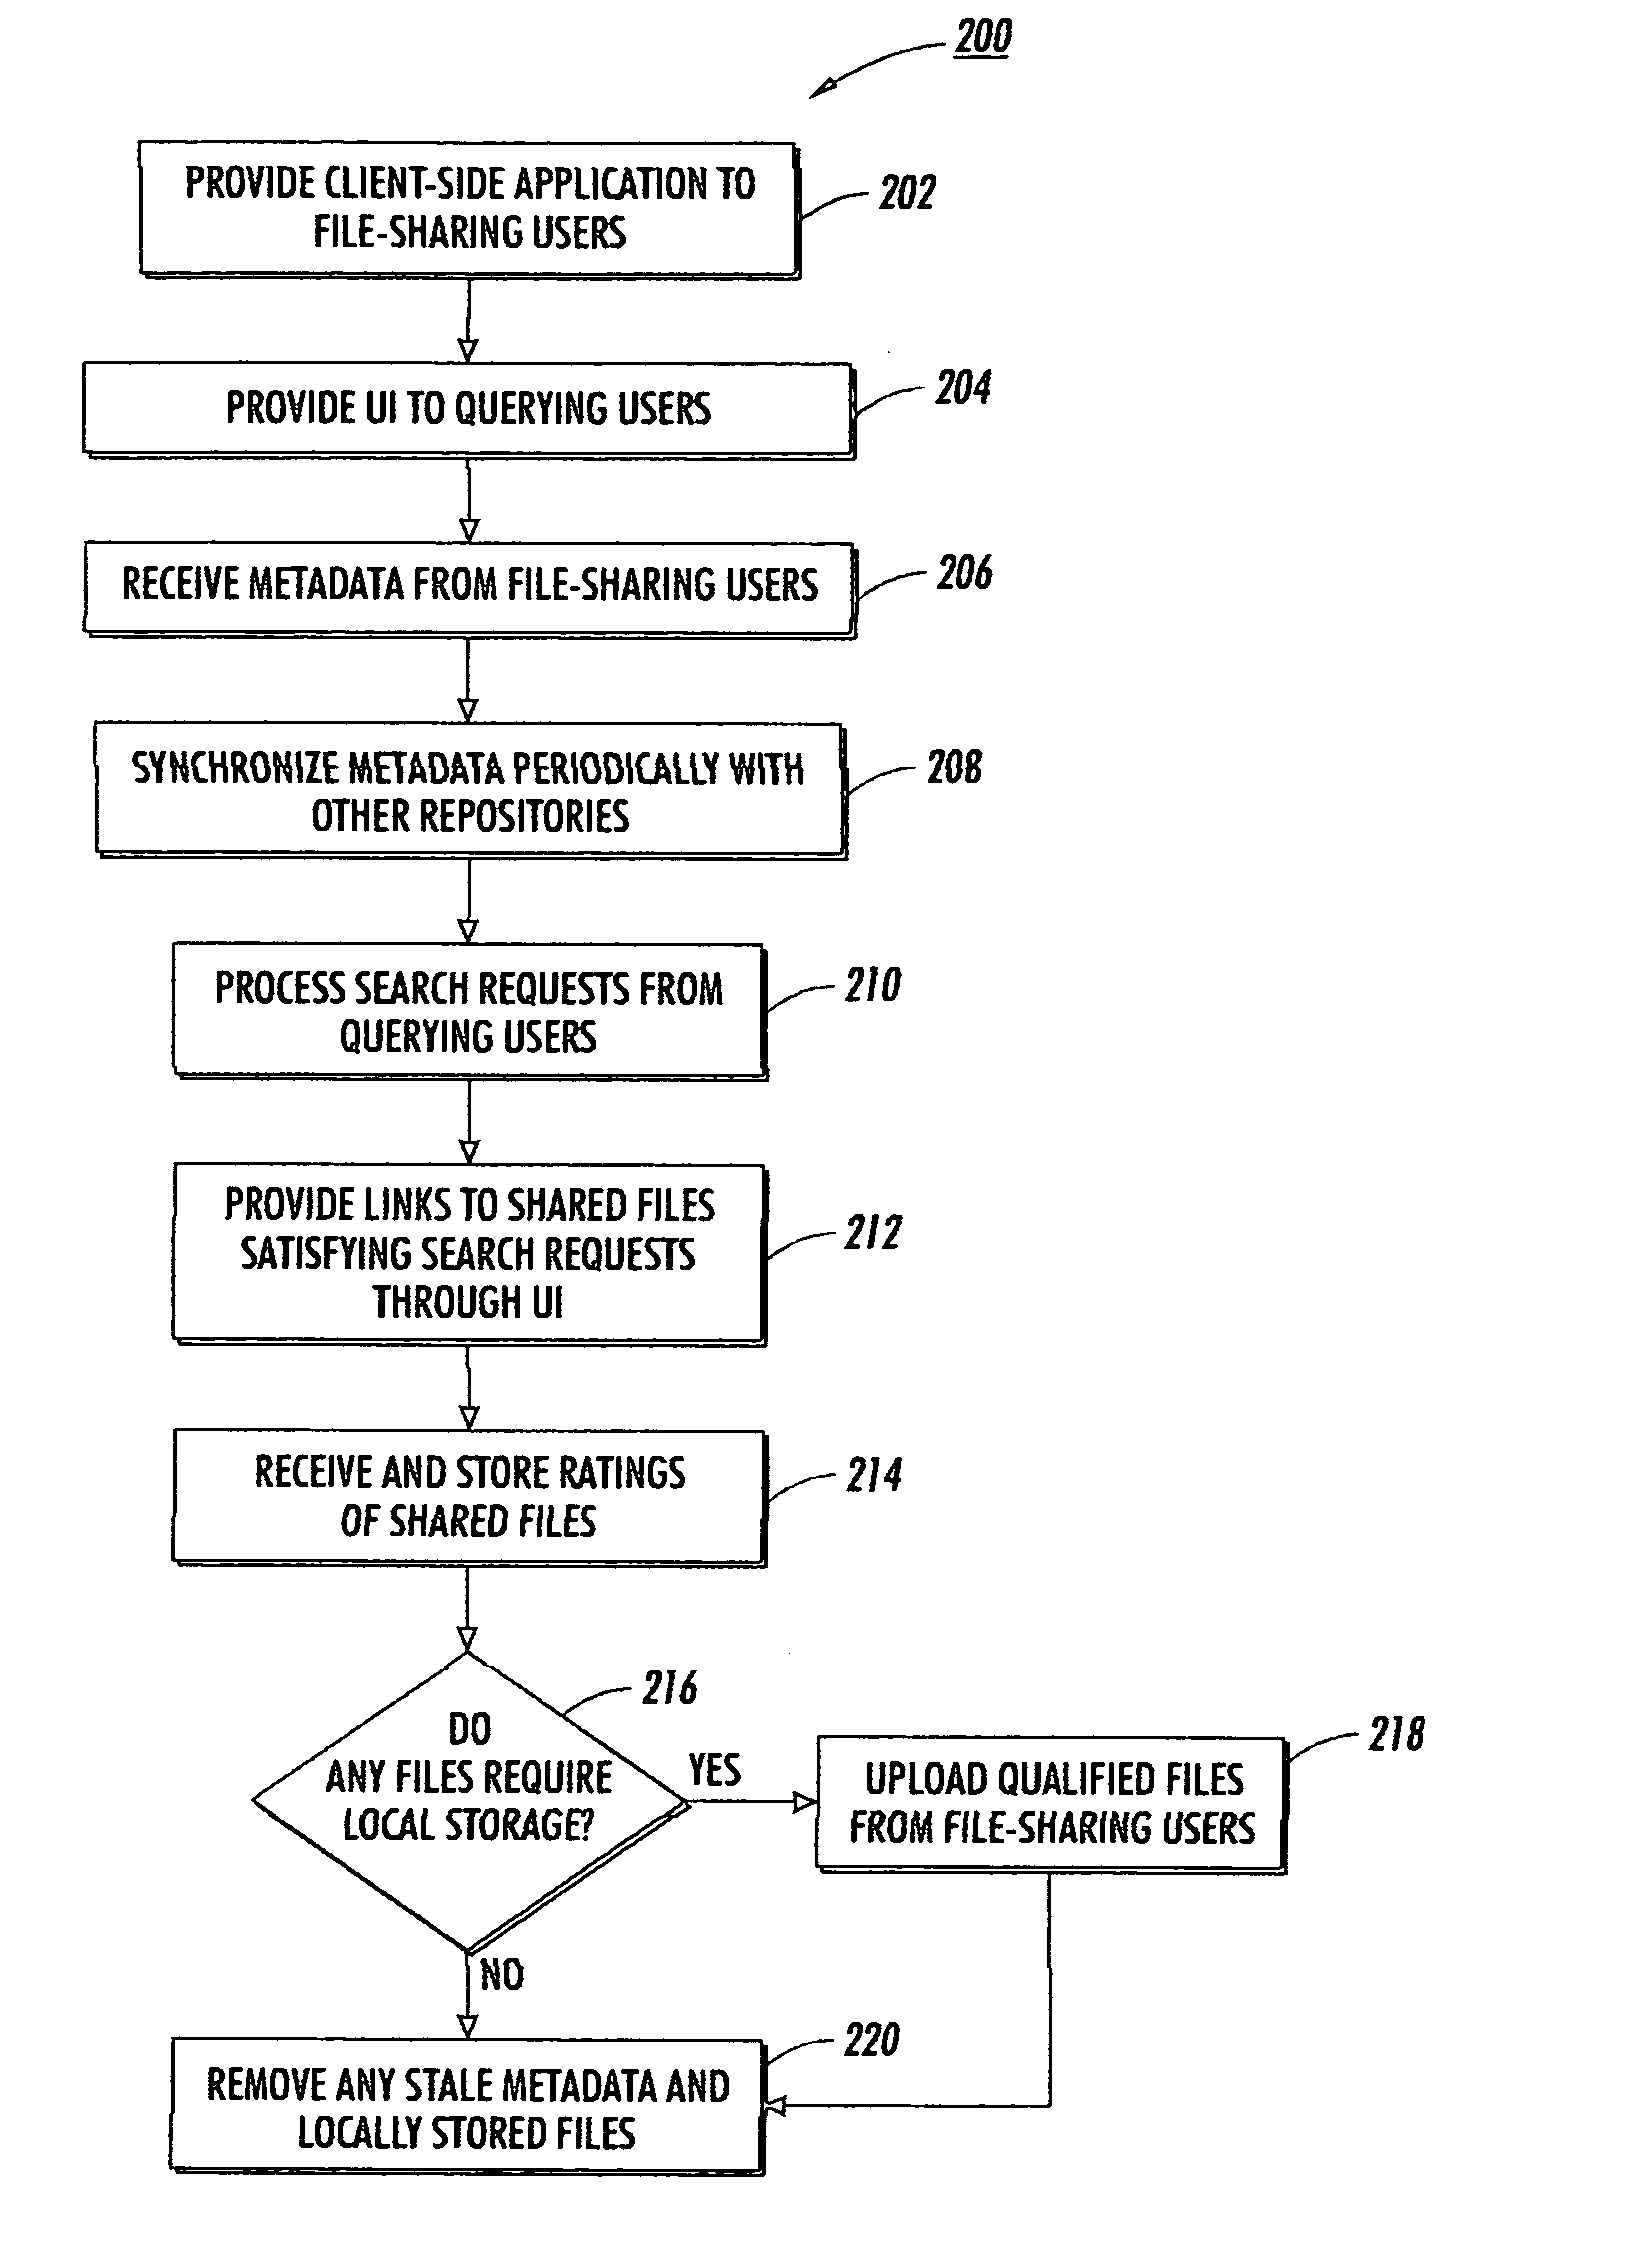 Multi-tiered structure for file sharing based on social roles